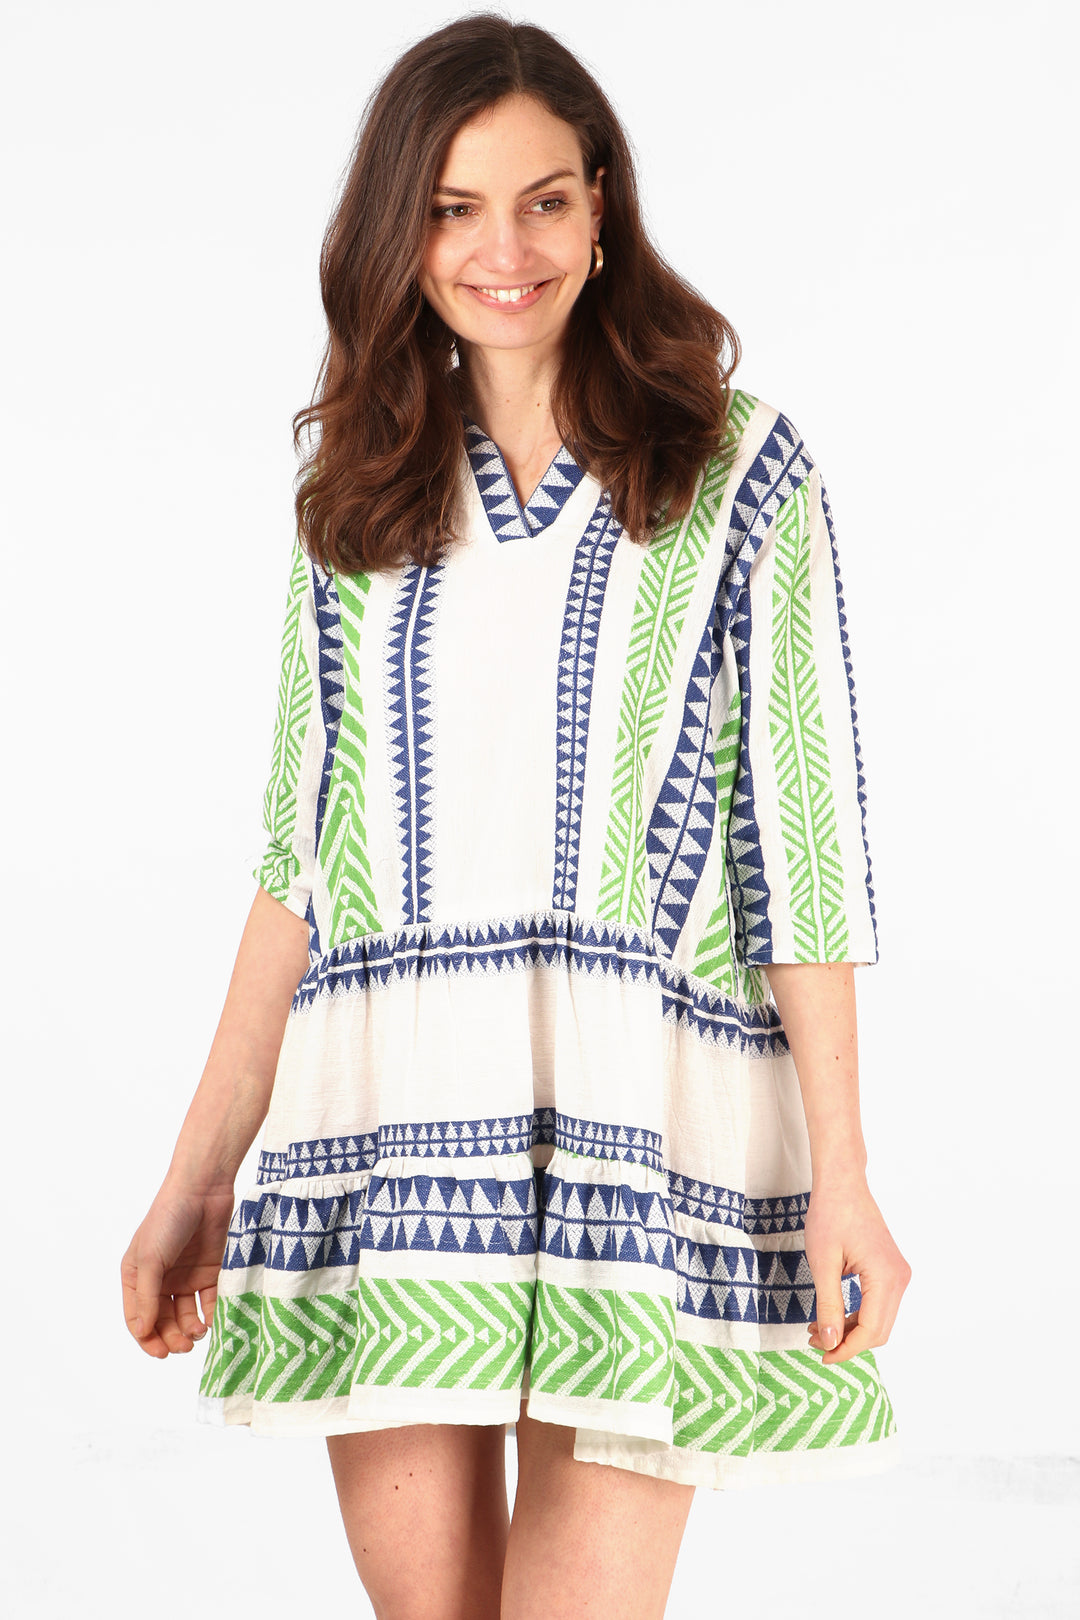 model wearing a green and blue aztec pattern mini dress with v neck and 3/4 sleeves